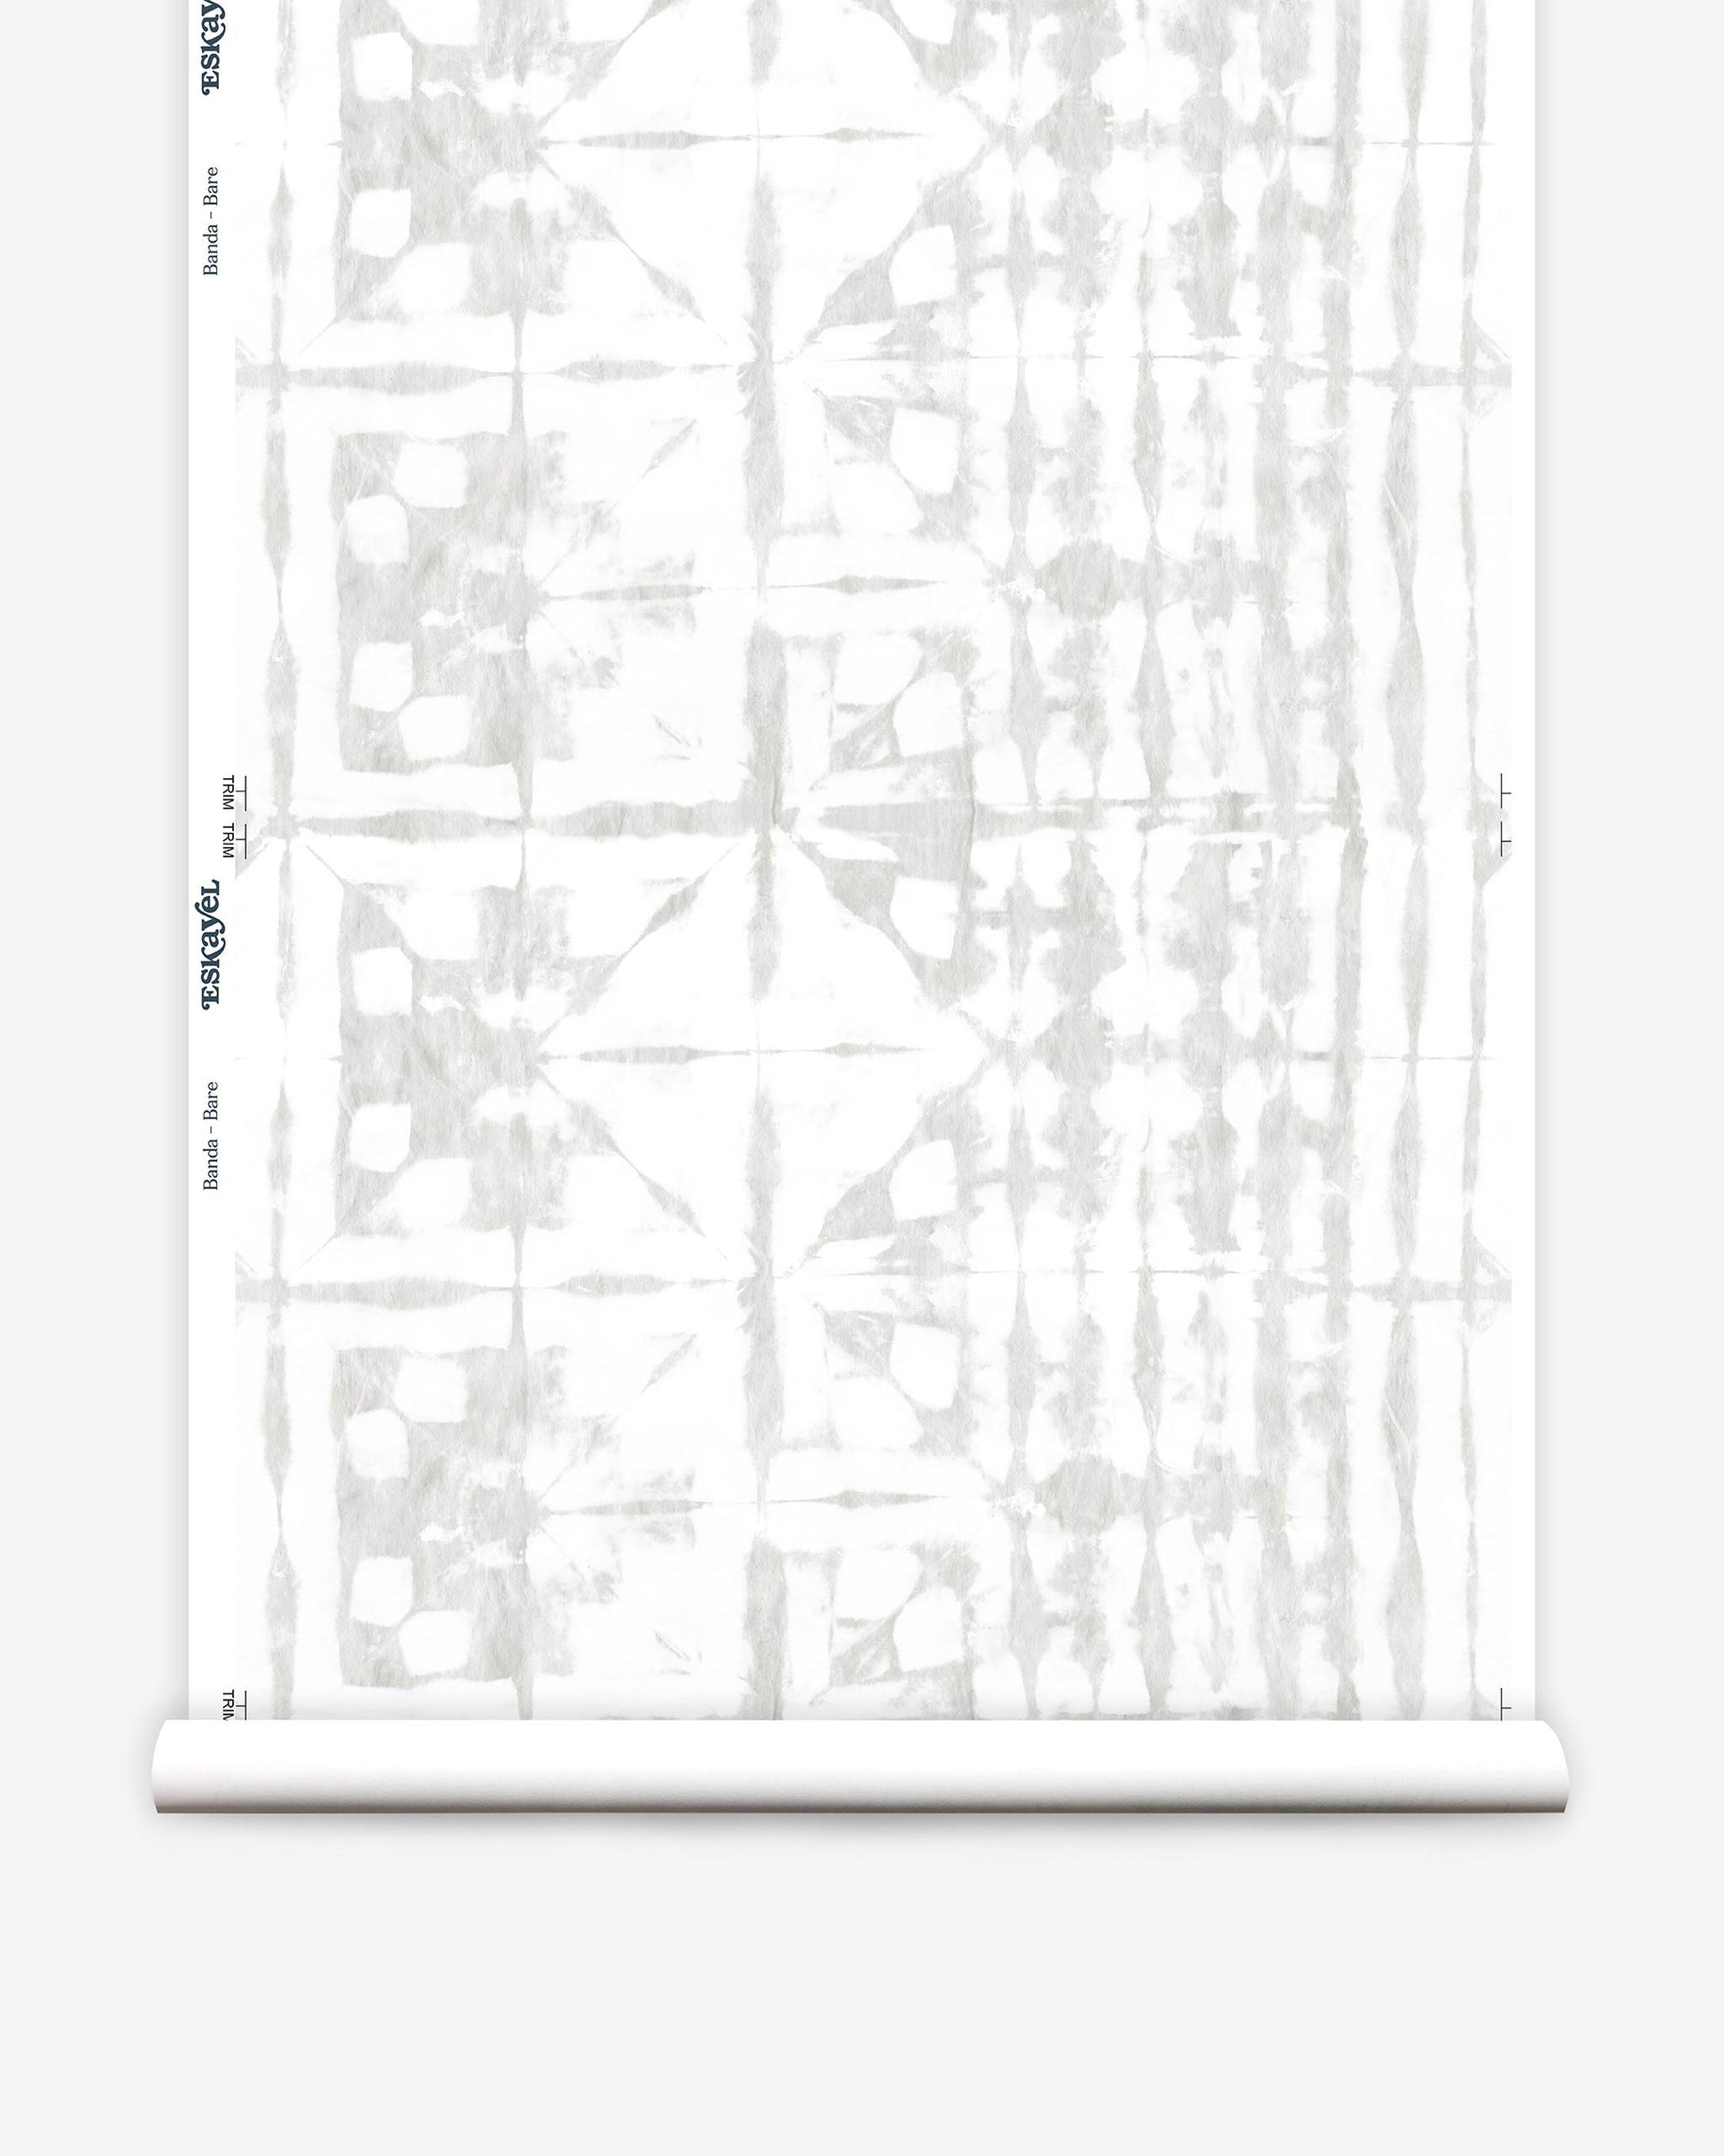 A roll of Banda Wallpaper with high-end fabric designs in white and gray, created using tie-dye techniques